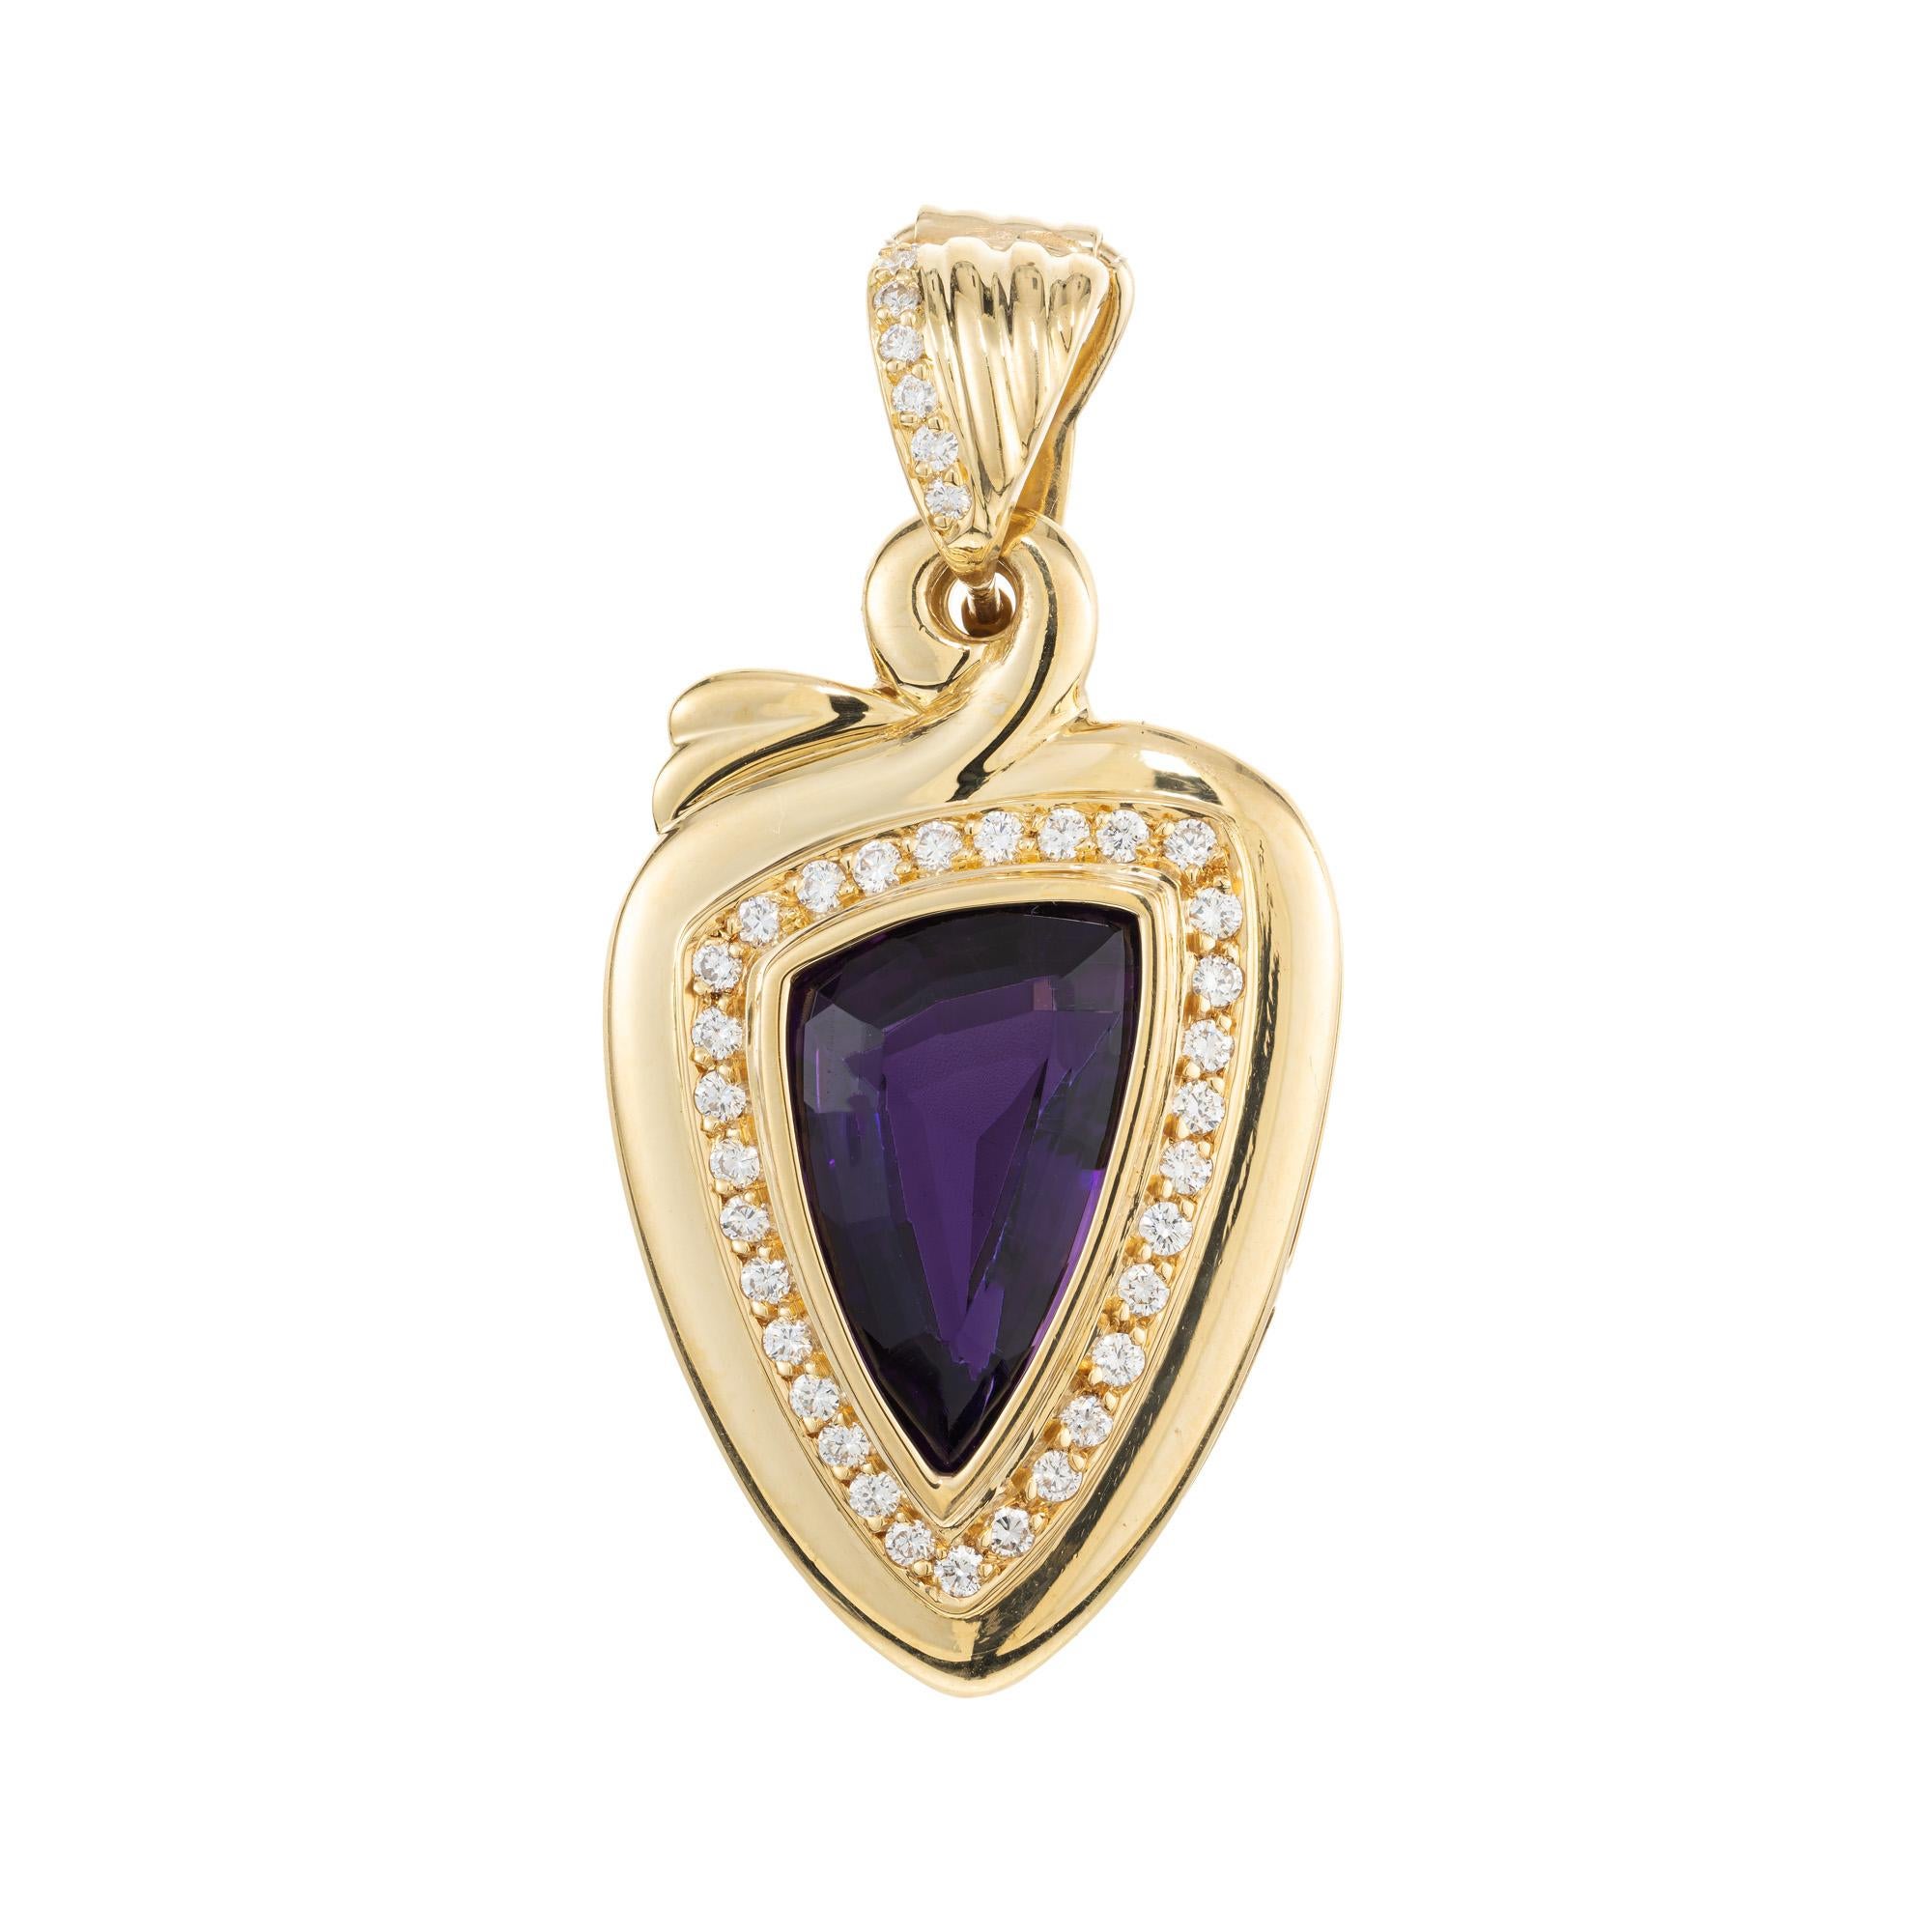 Vintage amethyst and diamond pedant enhancer. Triangular 5.50crt. center amethyst set in a 14k yellow gold pendant setting accented with 38 round brilliant cut diamonds, formed into a halo and along the bail. 

1 free form triangular purple